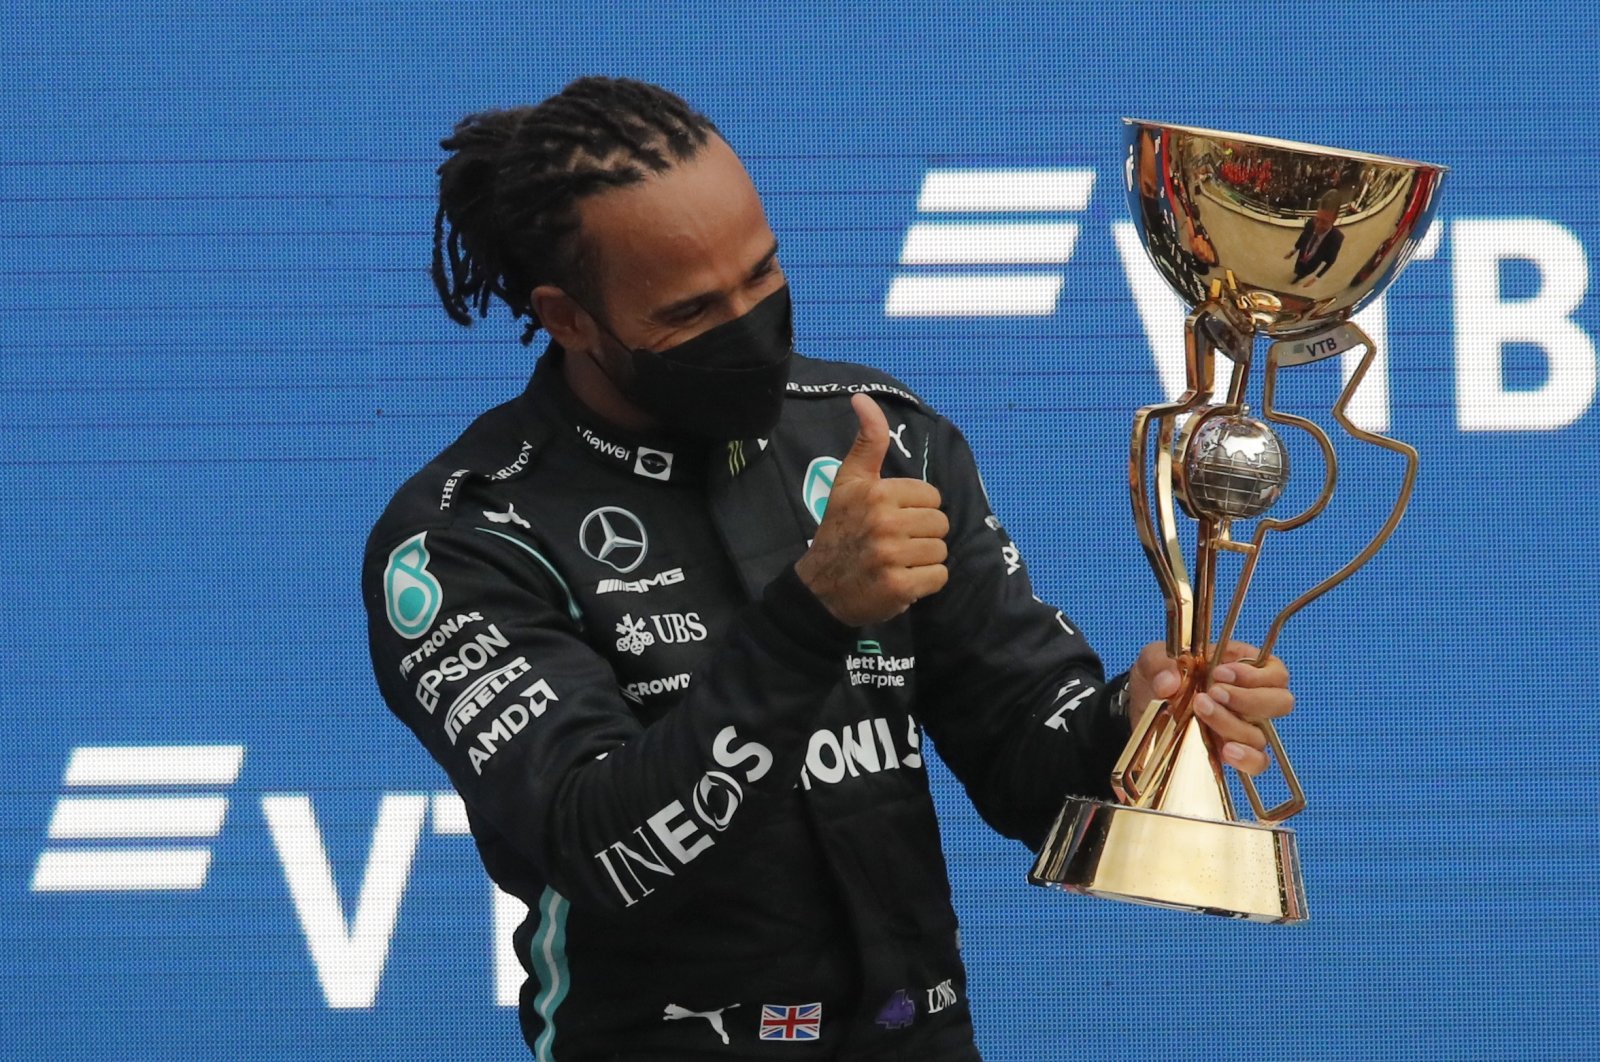 Mercedes' Lewis Hamilton celebrates with the Russian Grand Prix trophy after winning the race at Sochi, Russia, Sept. 26, 2021. (Reuters Photo)